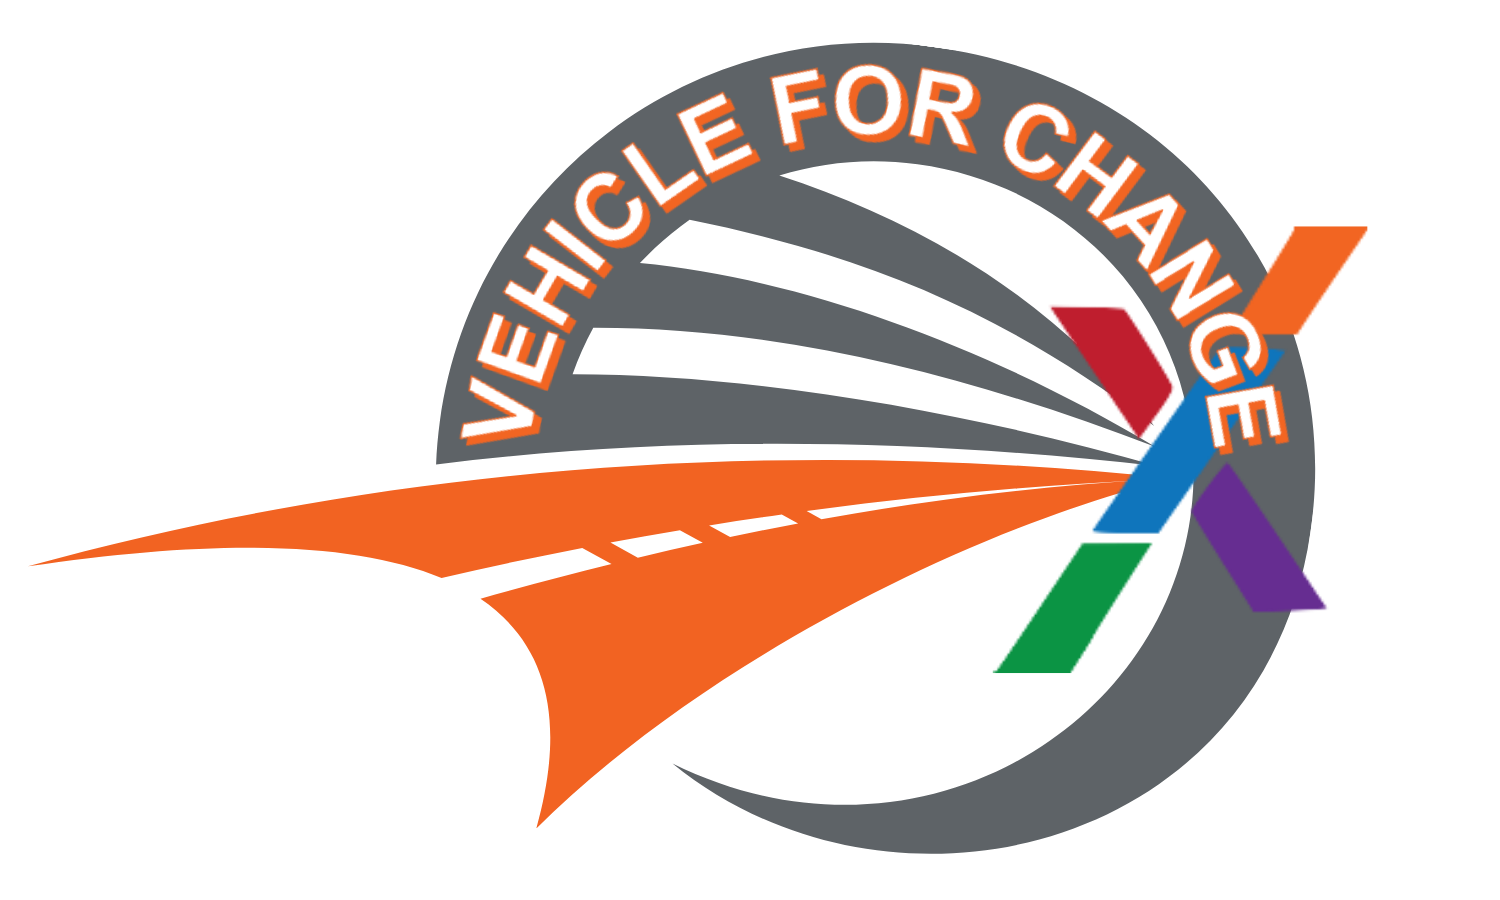 Vehicle for change_Equity